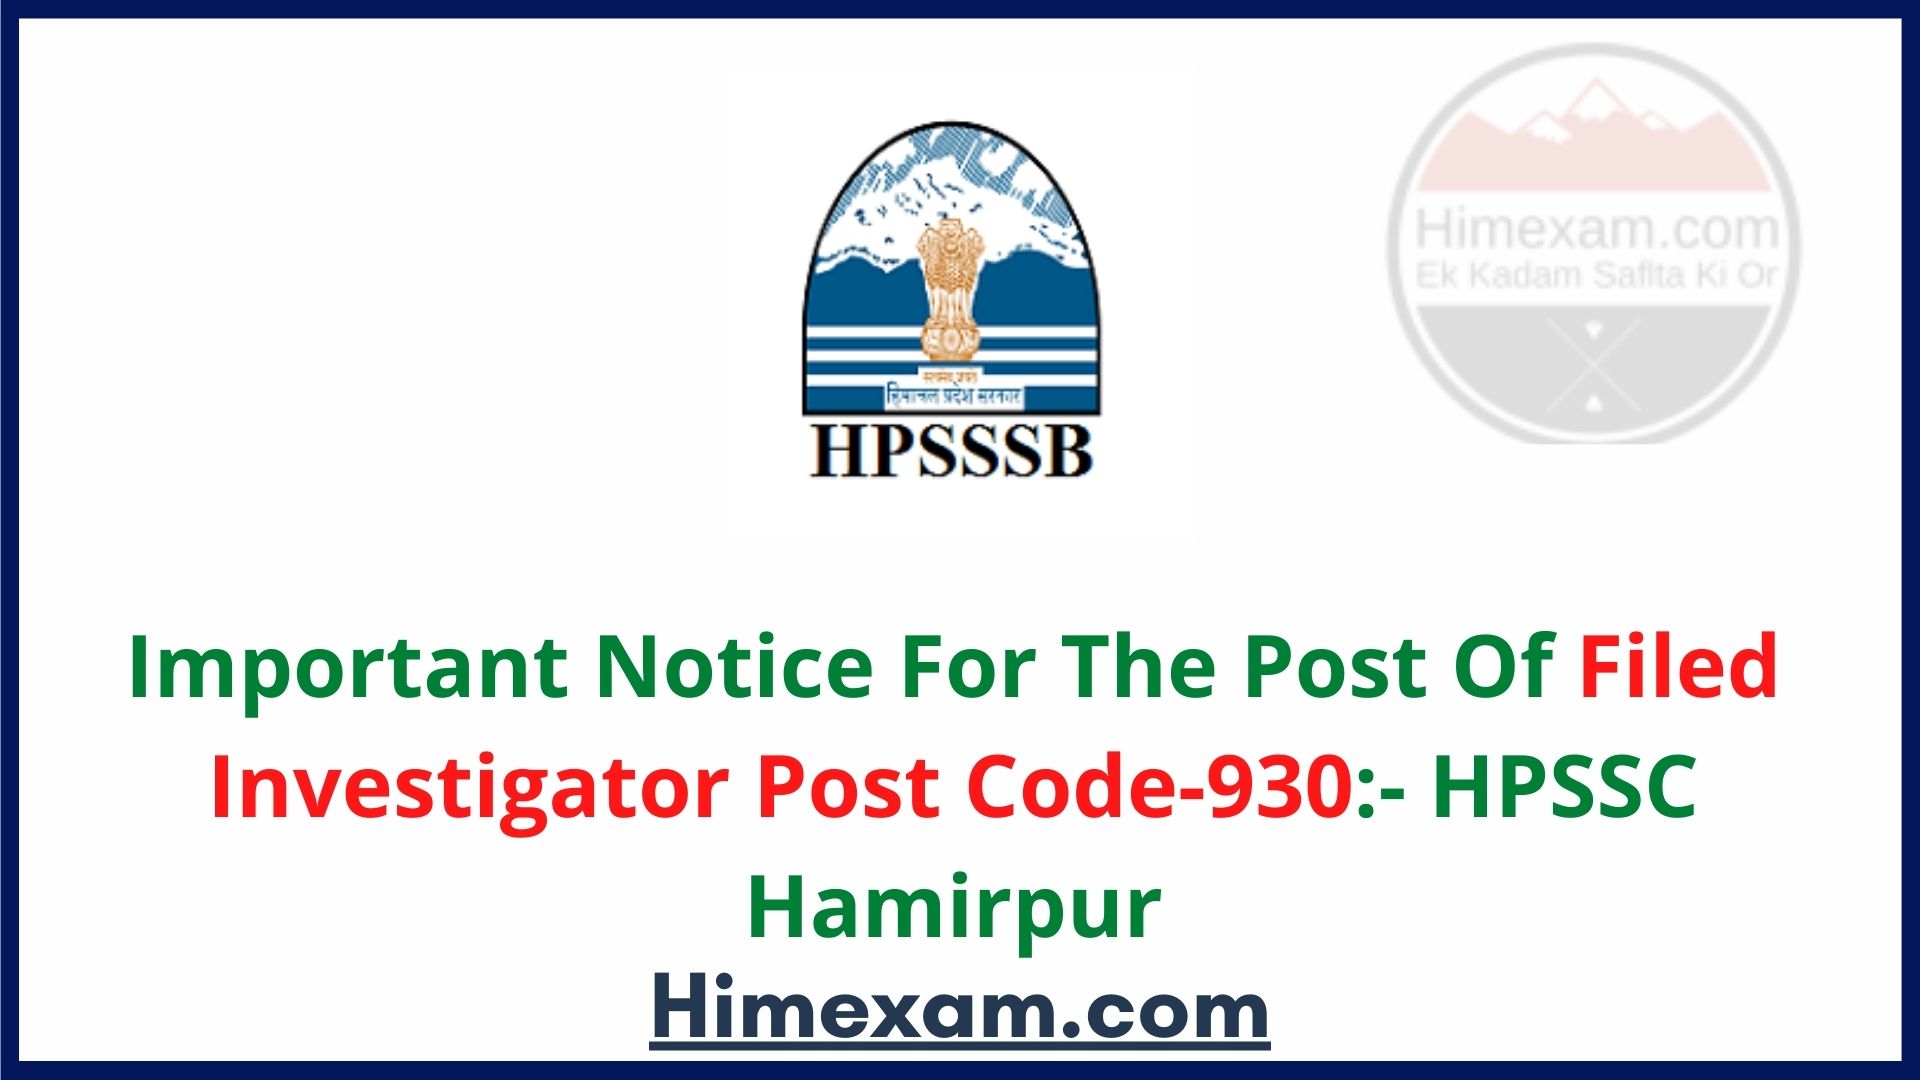 Important Notice For The Post Of Filed Investigator Post Code-930:- HPSSC Hamirpur